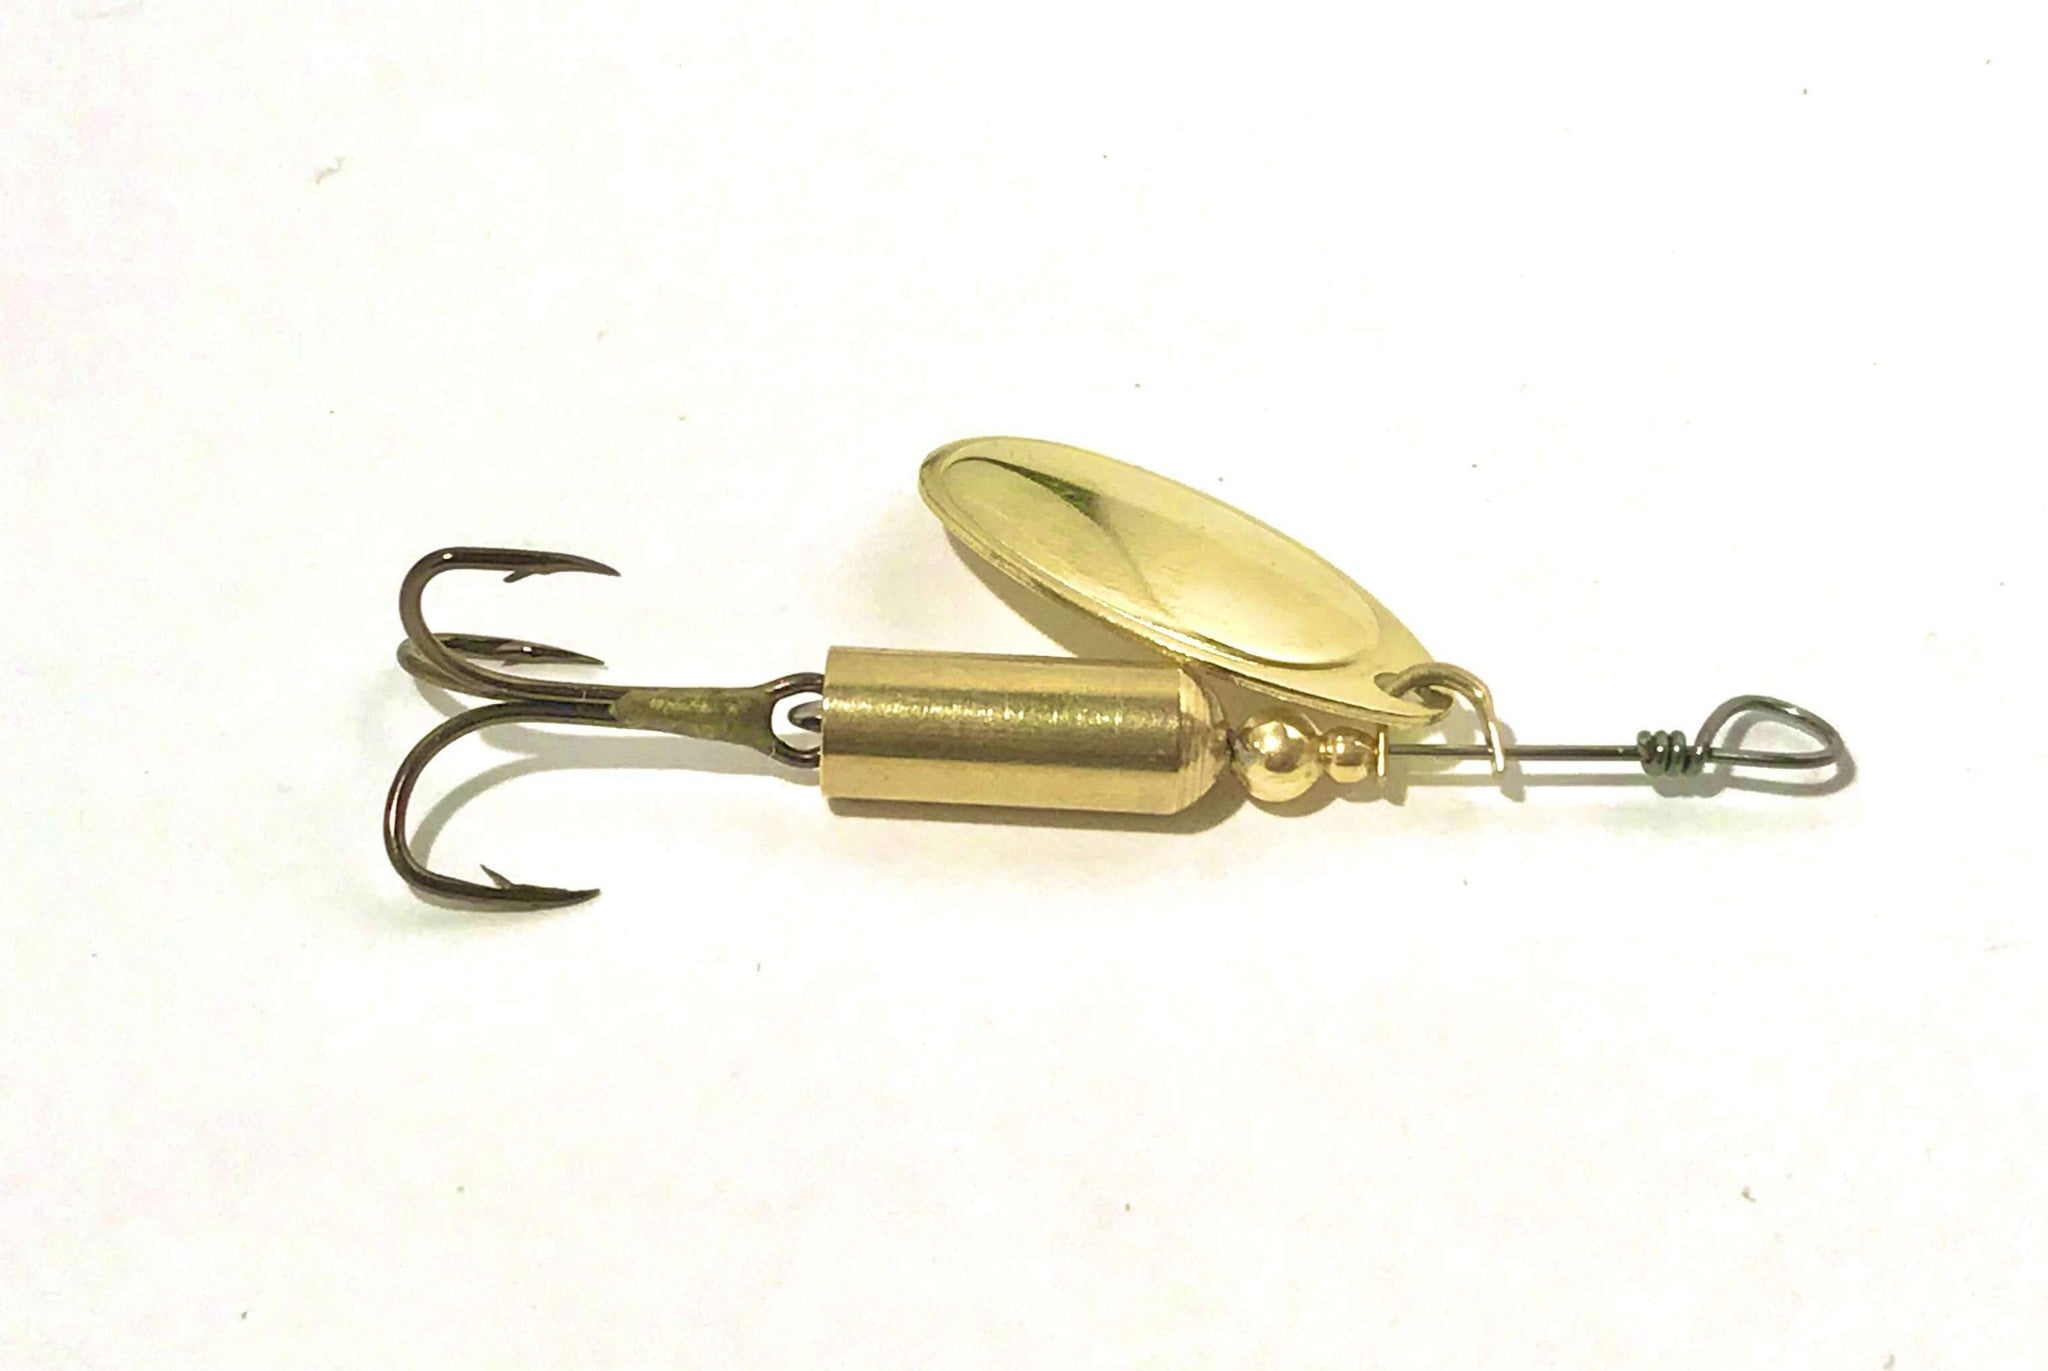 2 Pack Weedless Inline Spinner EWG Hook + 5 Free 3.5 Inch Shad Baits –  Crawdads Fishing Tackle